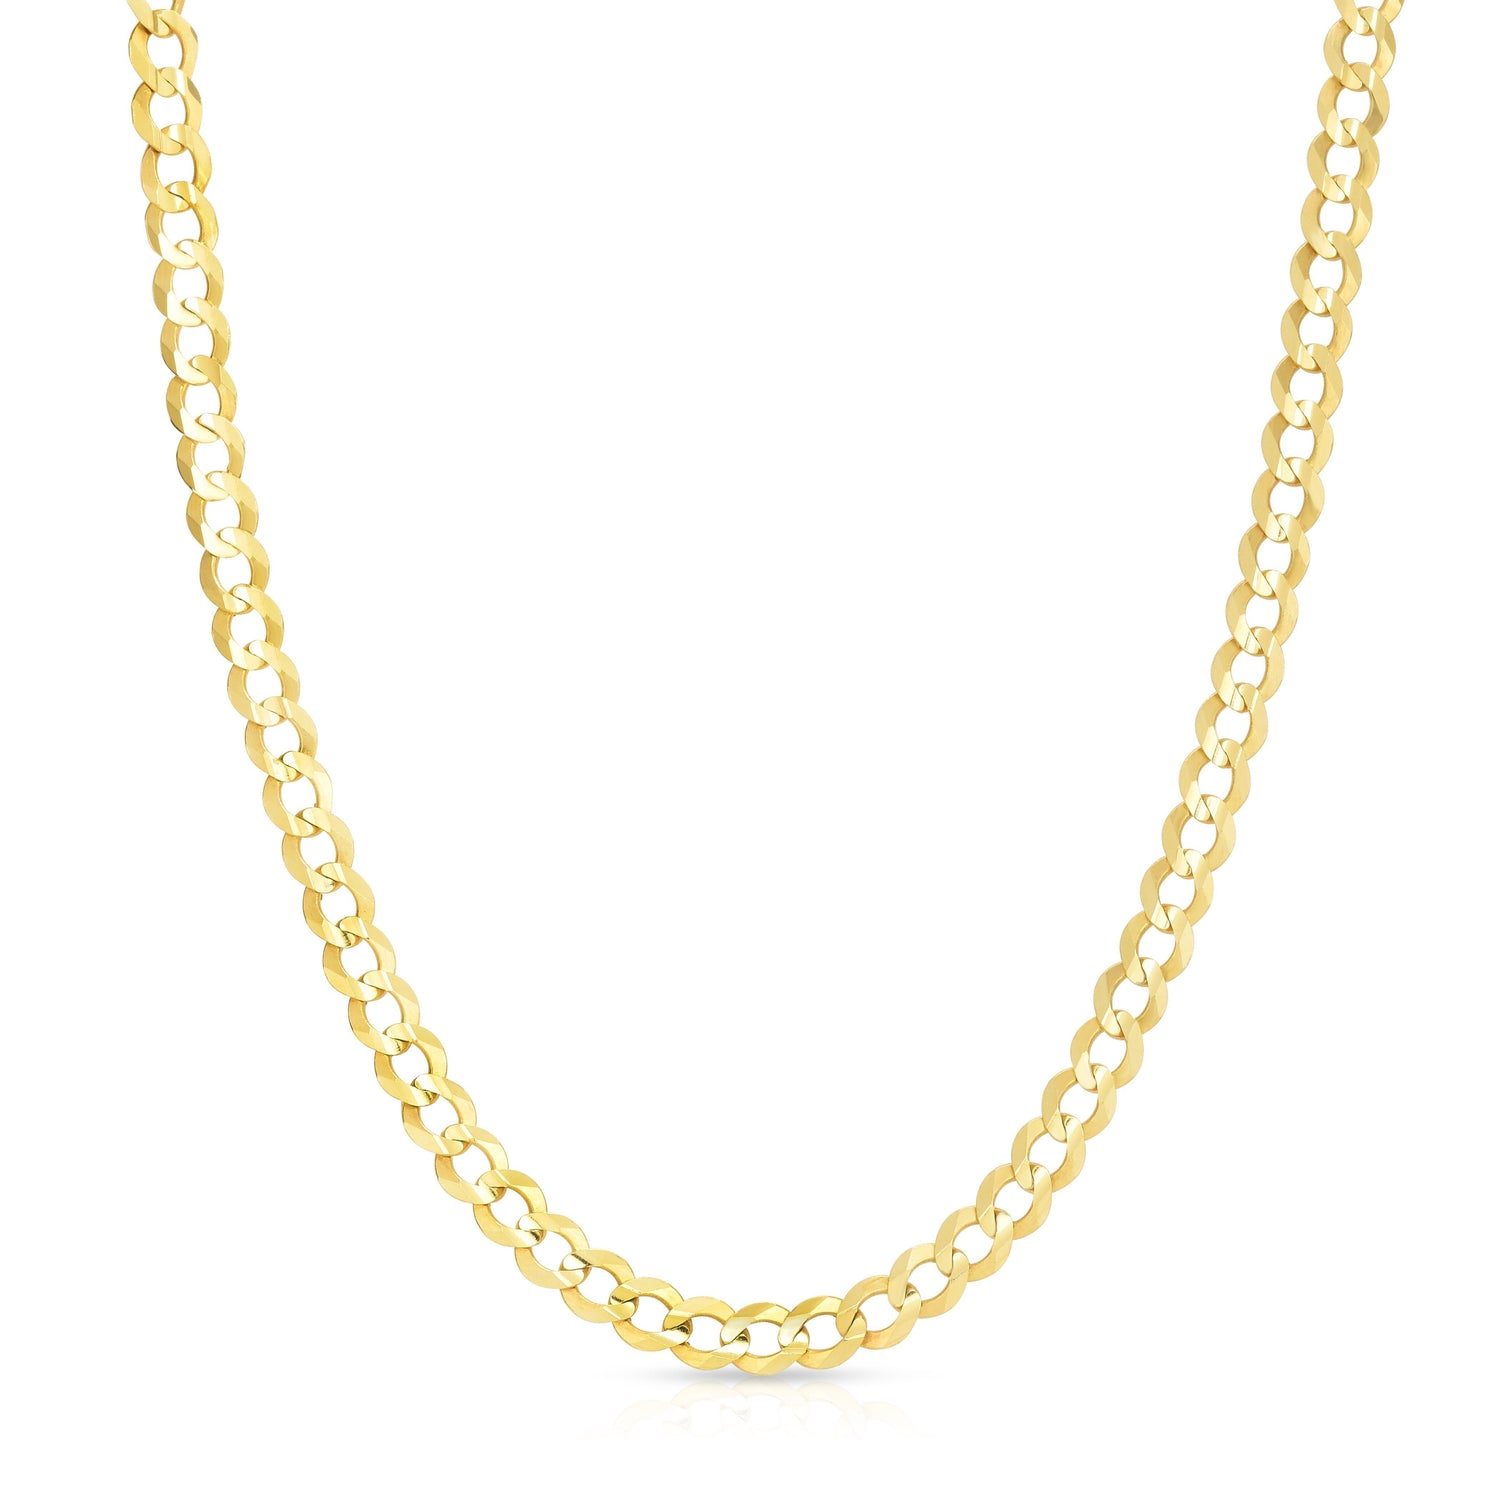 10k Yellow Gold Mens Thick Solid Curb Cuban Link Chain Necklace, 0.3 Inch (7mm)